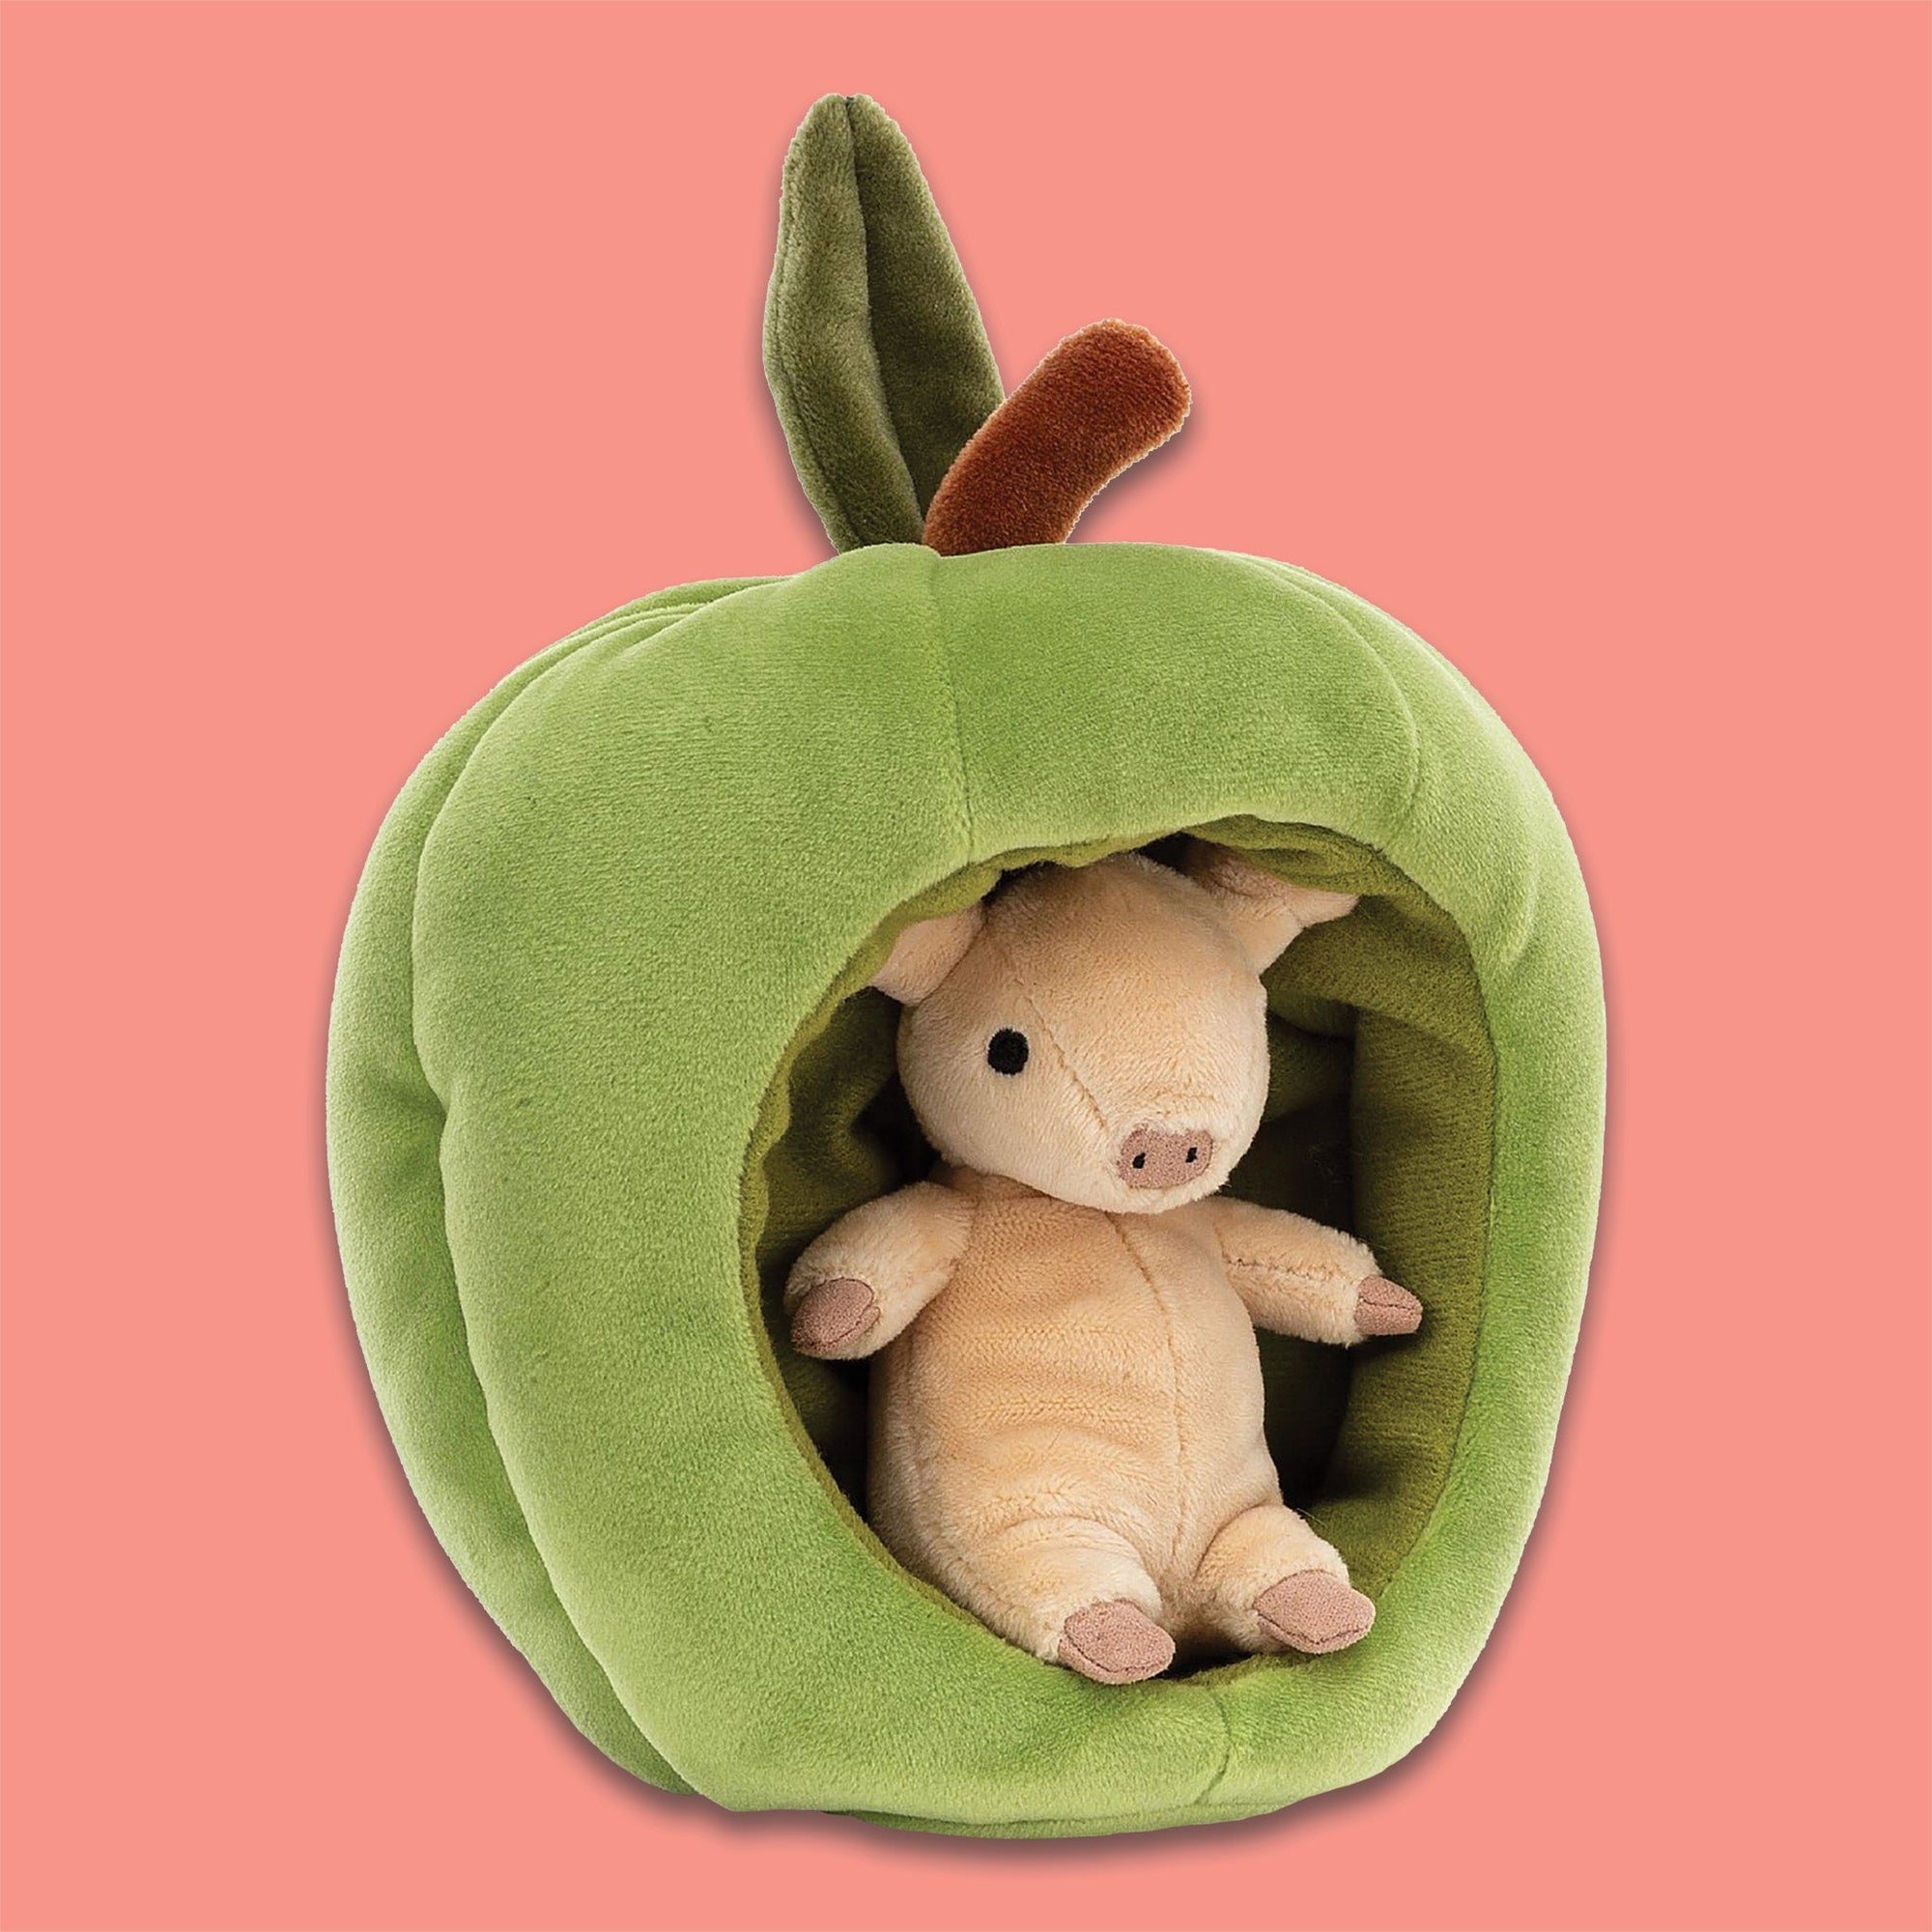 On a coral backgrounds sits a Jellycat Brambling Pig inside a green apple. This apple is stretchy-soft and cozily lined, with a velvety leaf on top. The pig is peach and has the softest fur.